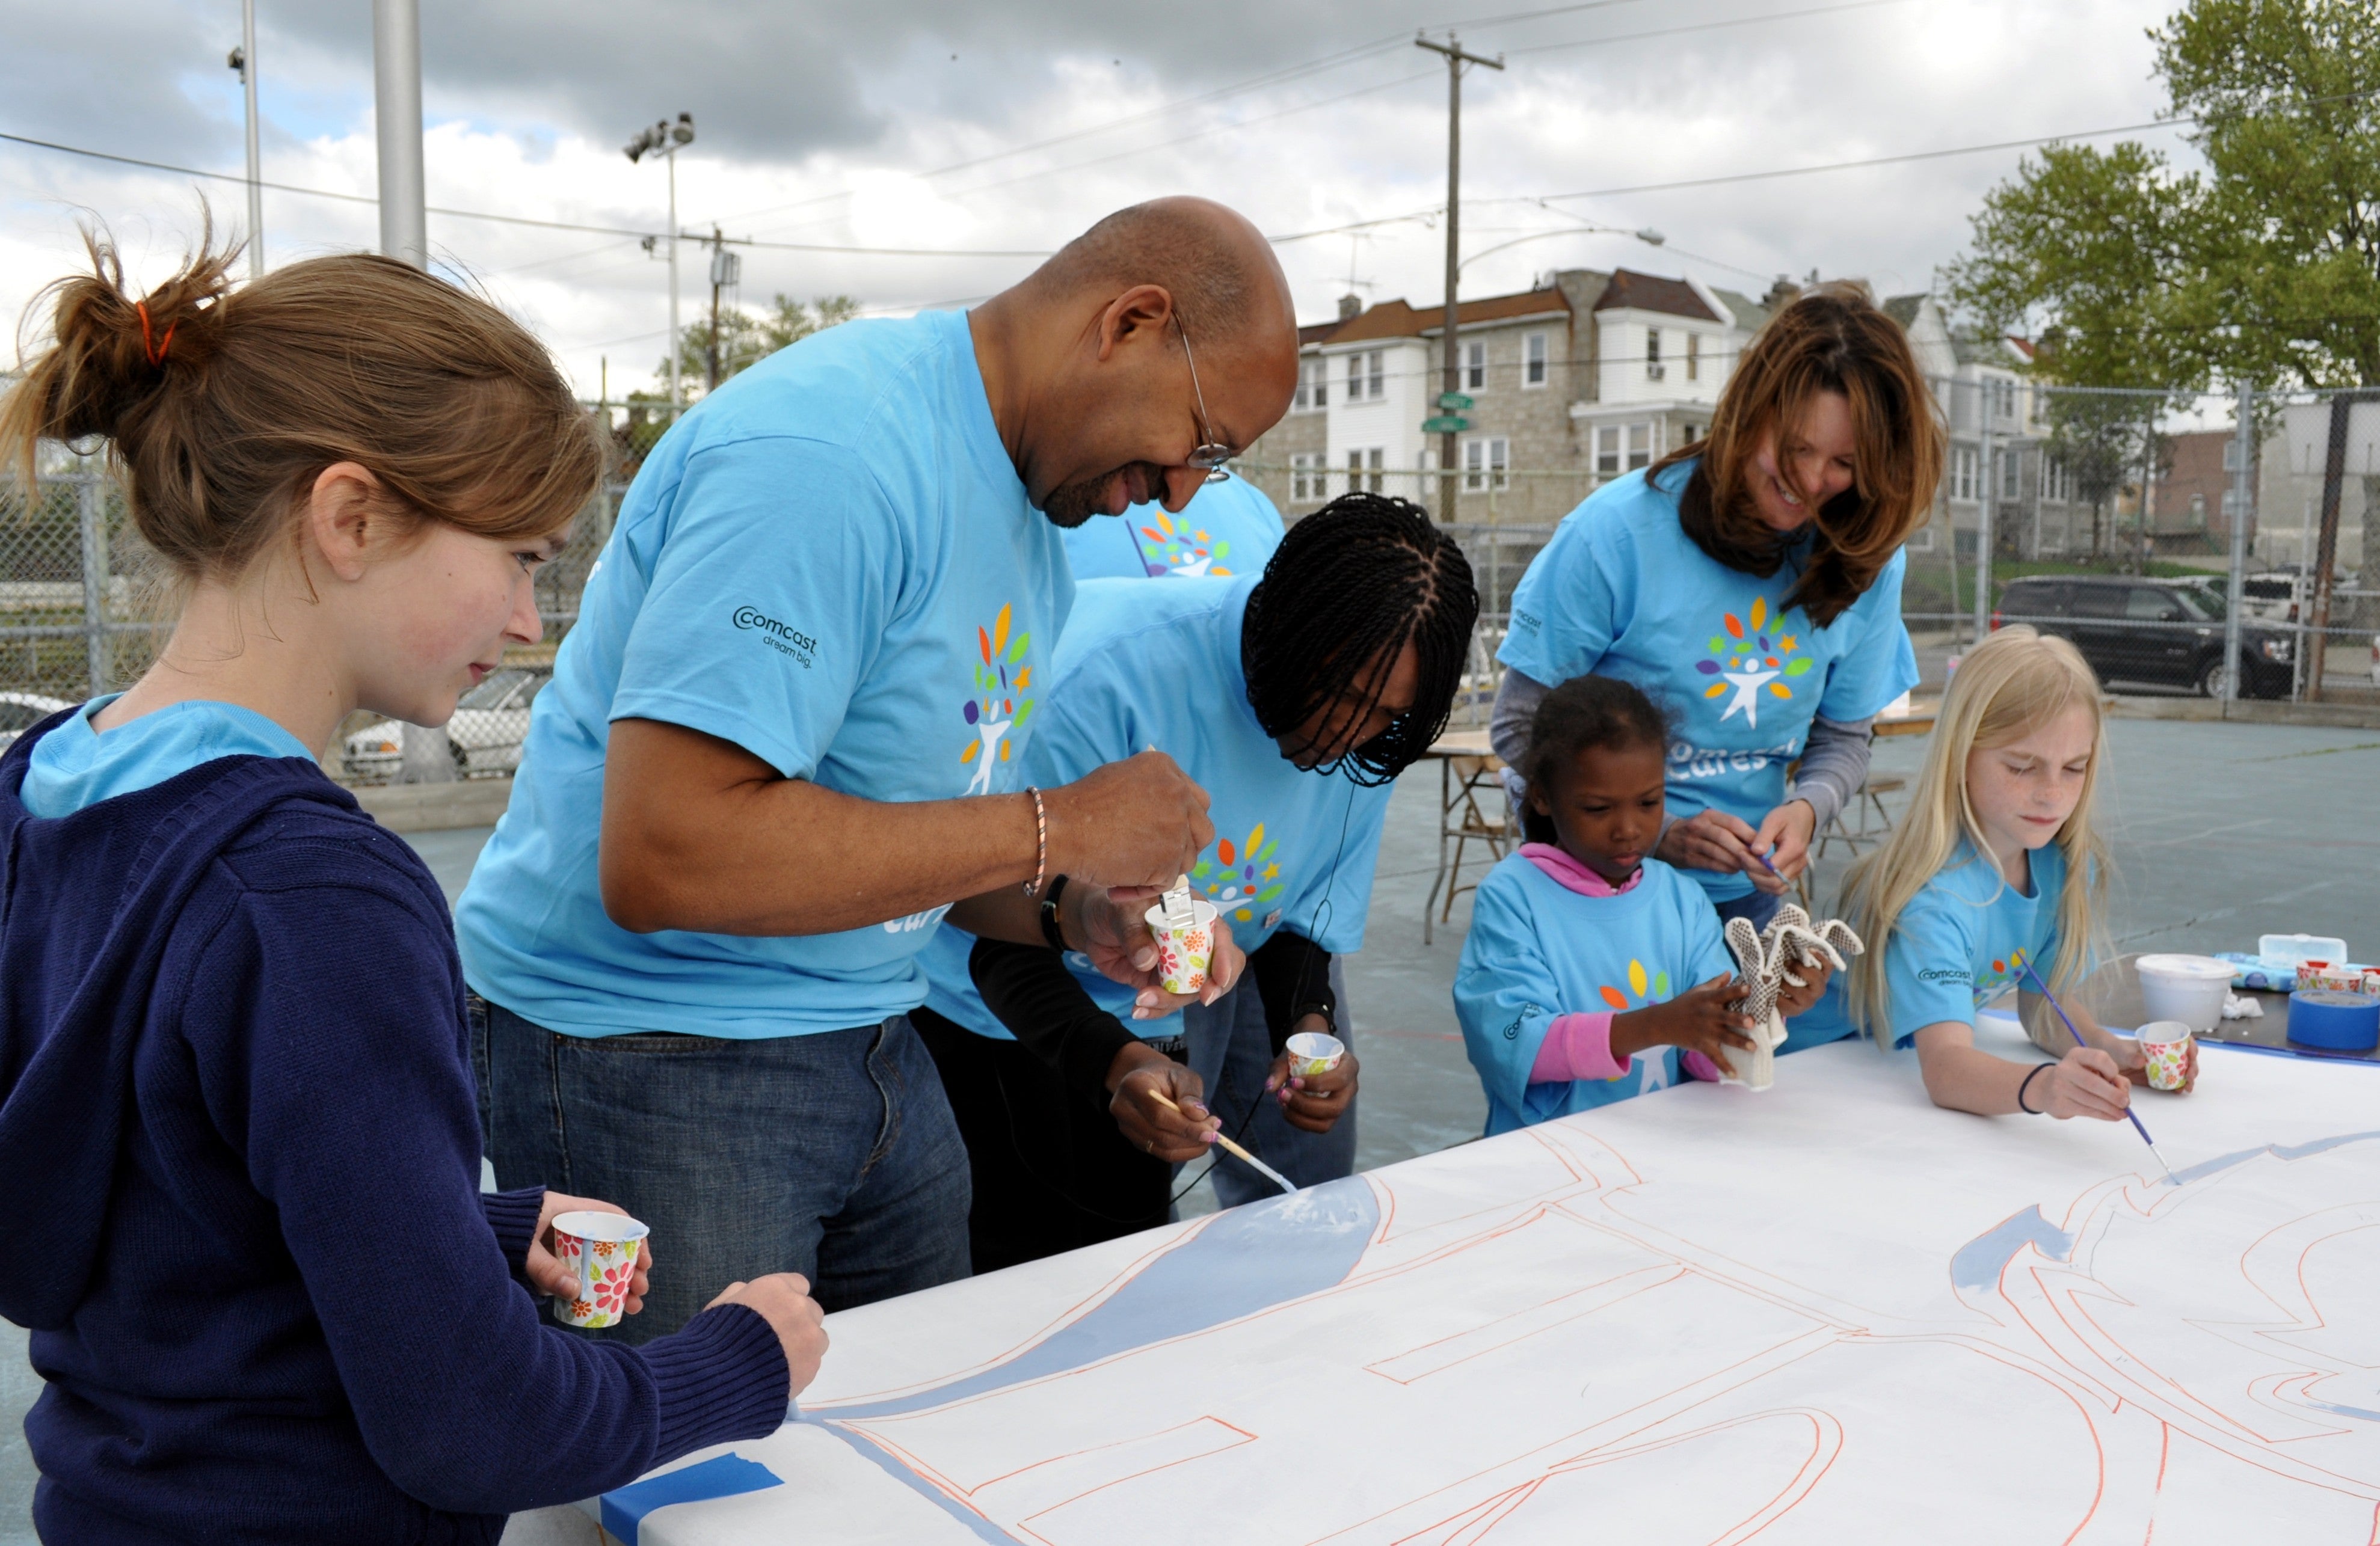 Mayor Michael Nutter (L) and Comcast's Amy Smith (R) pitch in to help a group of young Comcast Cares Day volunteers with a paint